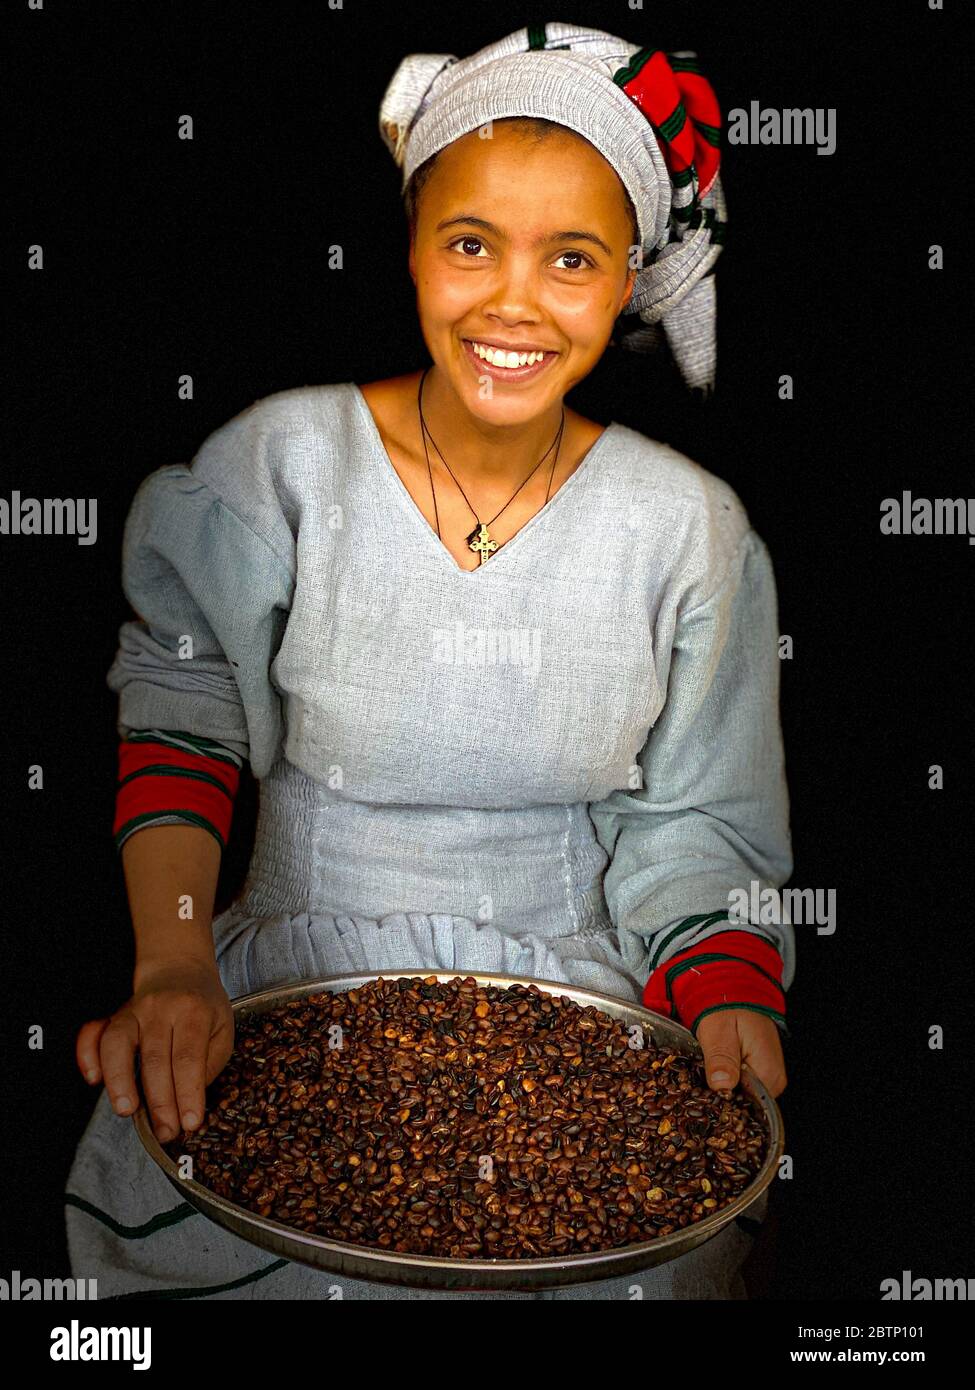 Young Afar woman with traditional clothing showing roasted coffee beans, Ethiopia, Africa Stock Photo